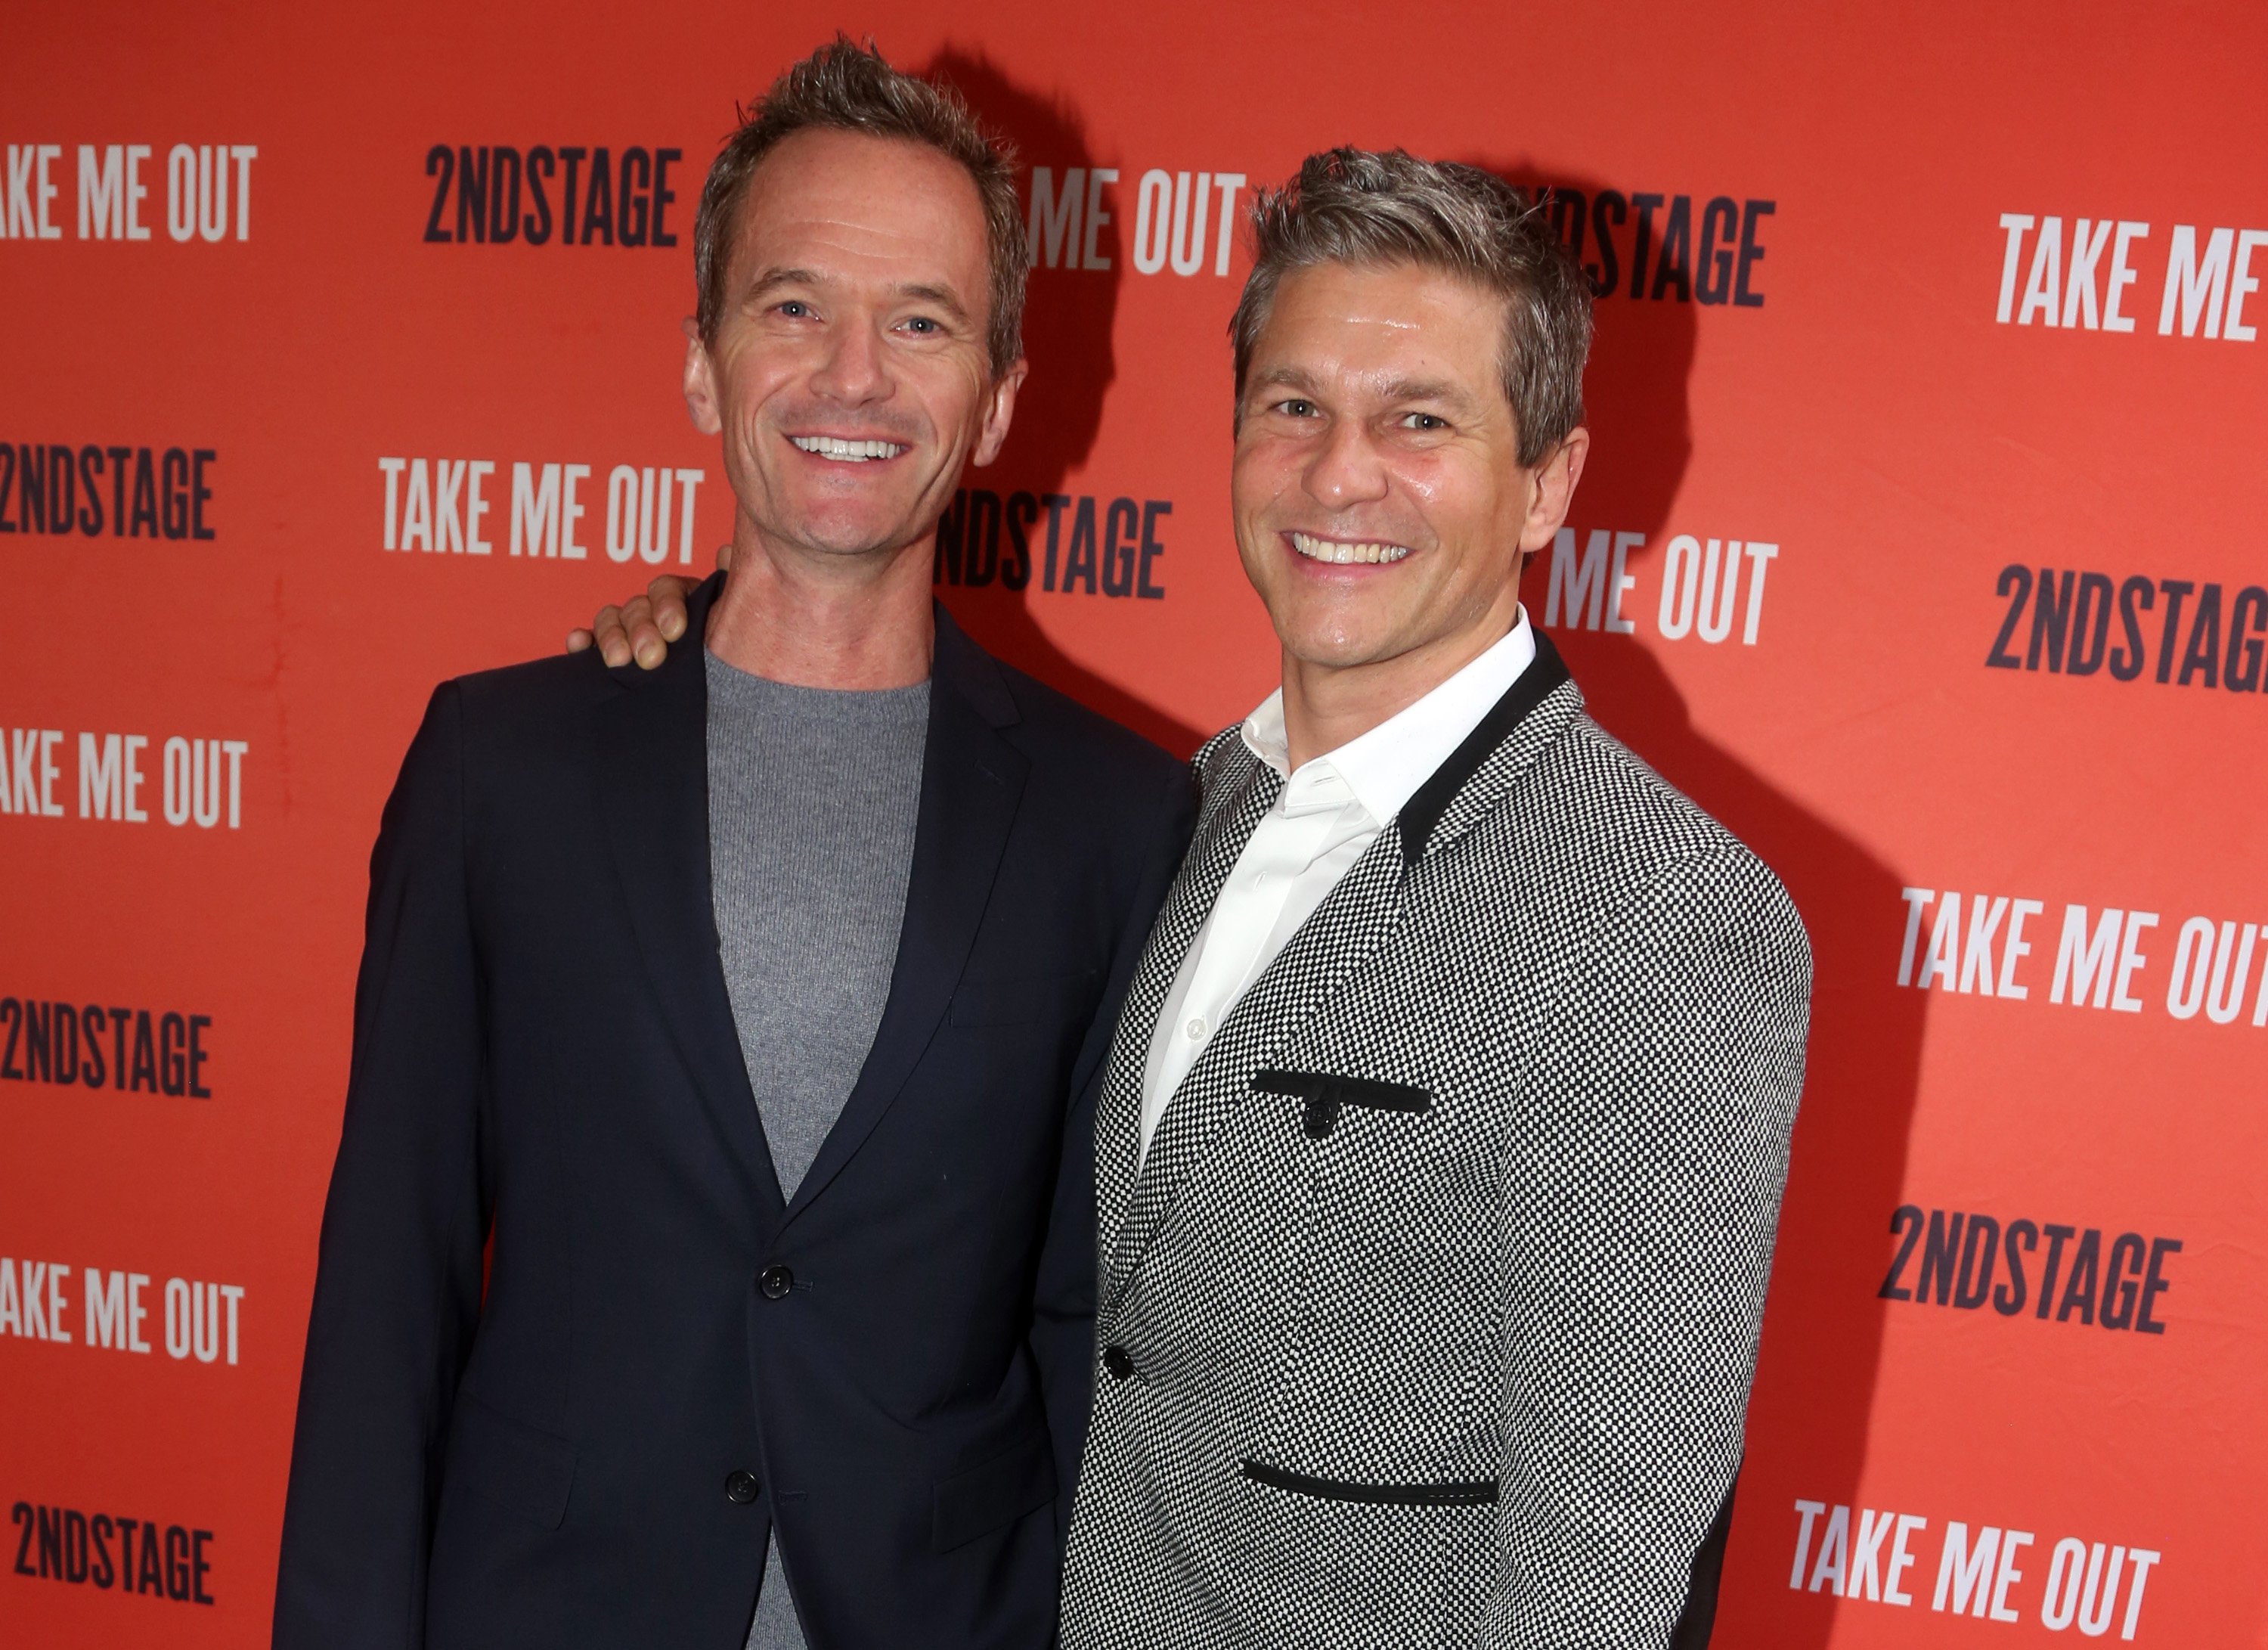 Neil Patrick Harris and David Burtka pose together on opening night of 'Take Me Out' on Broadway